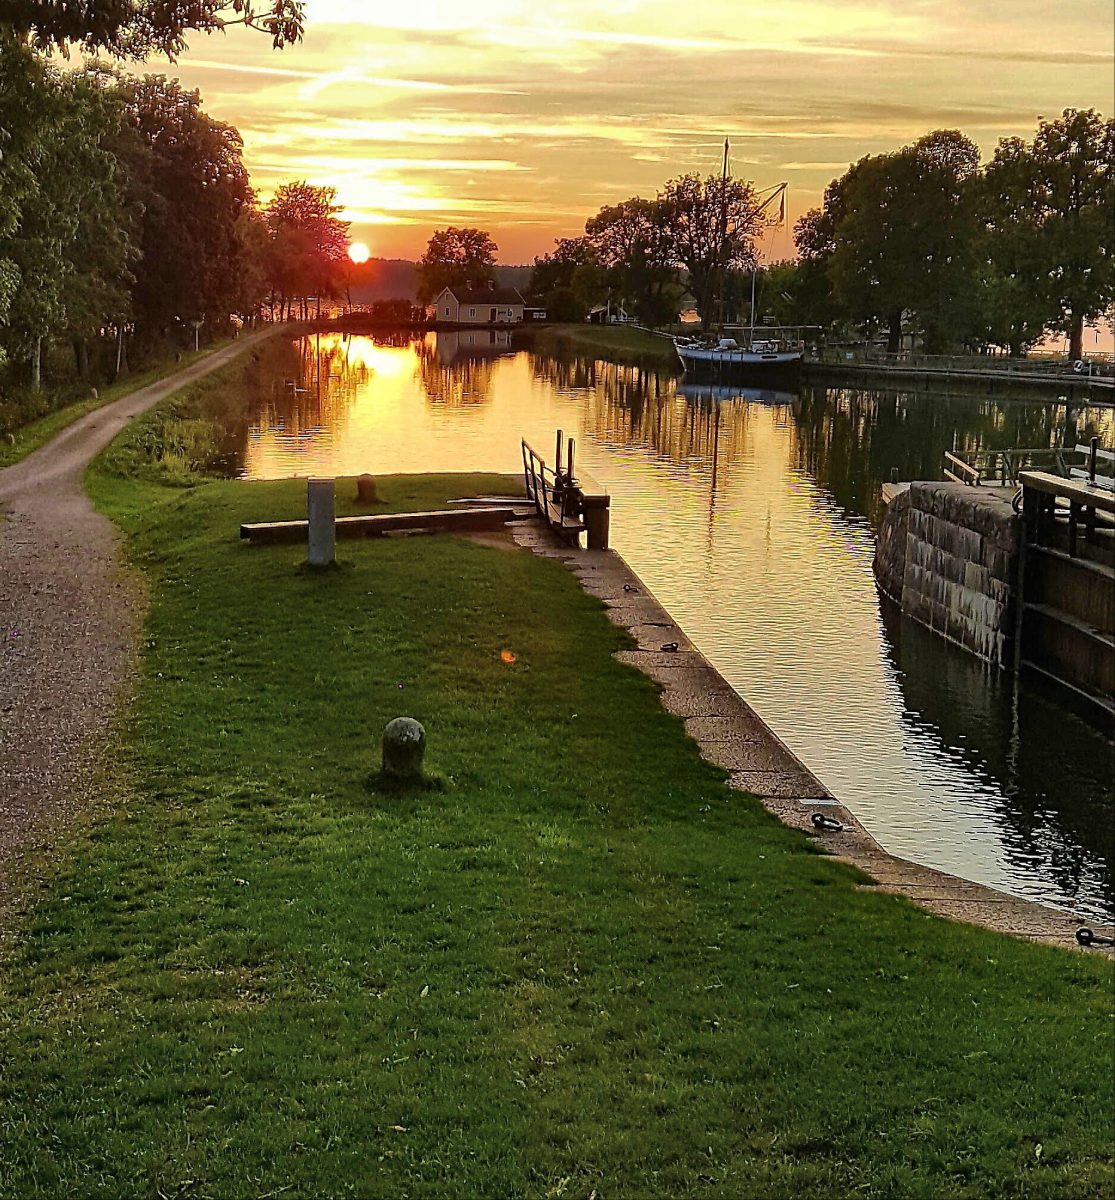 A golden sunset over the canal